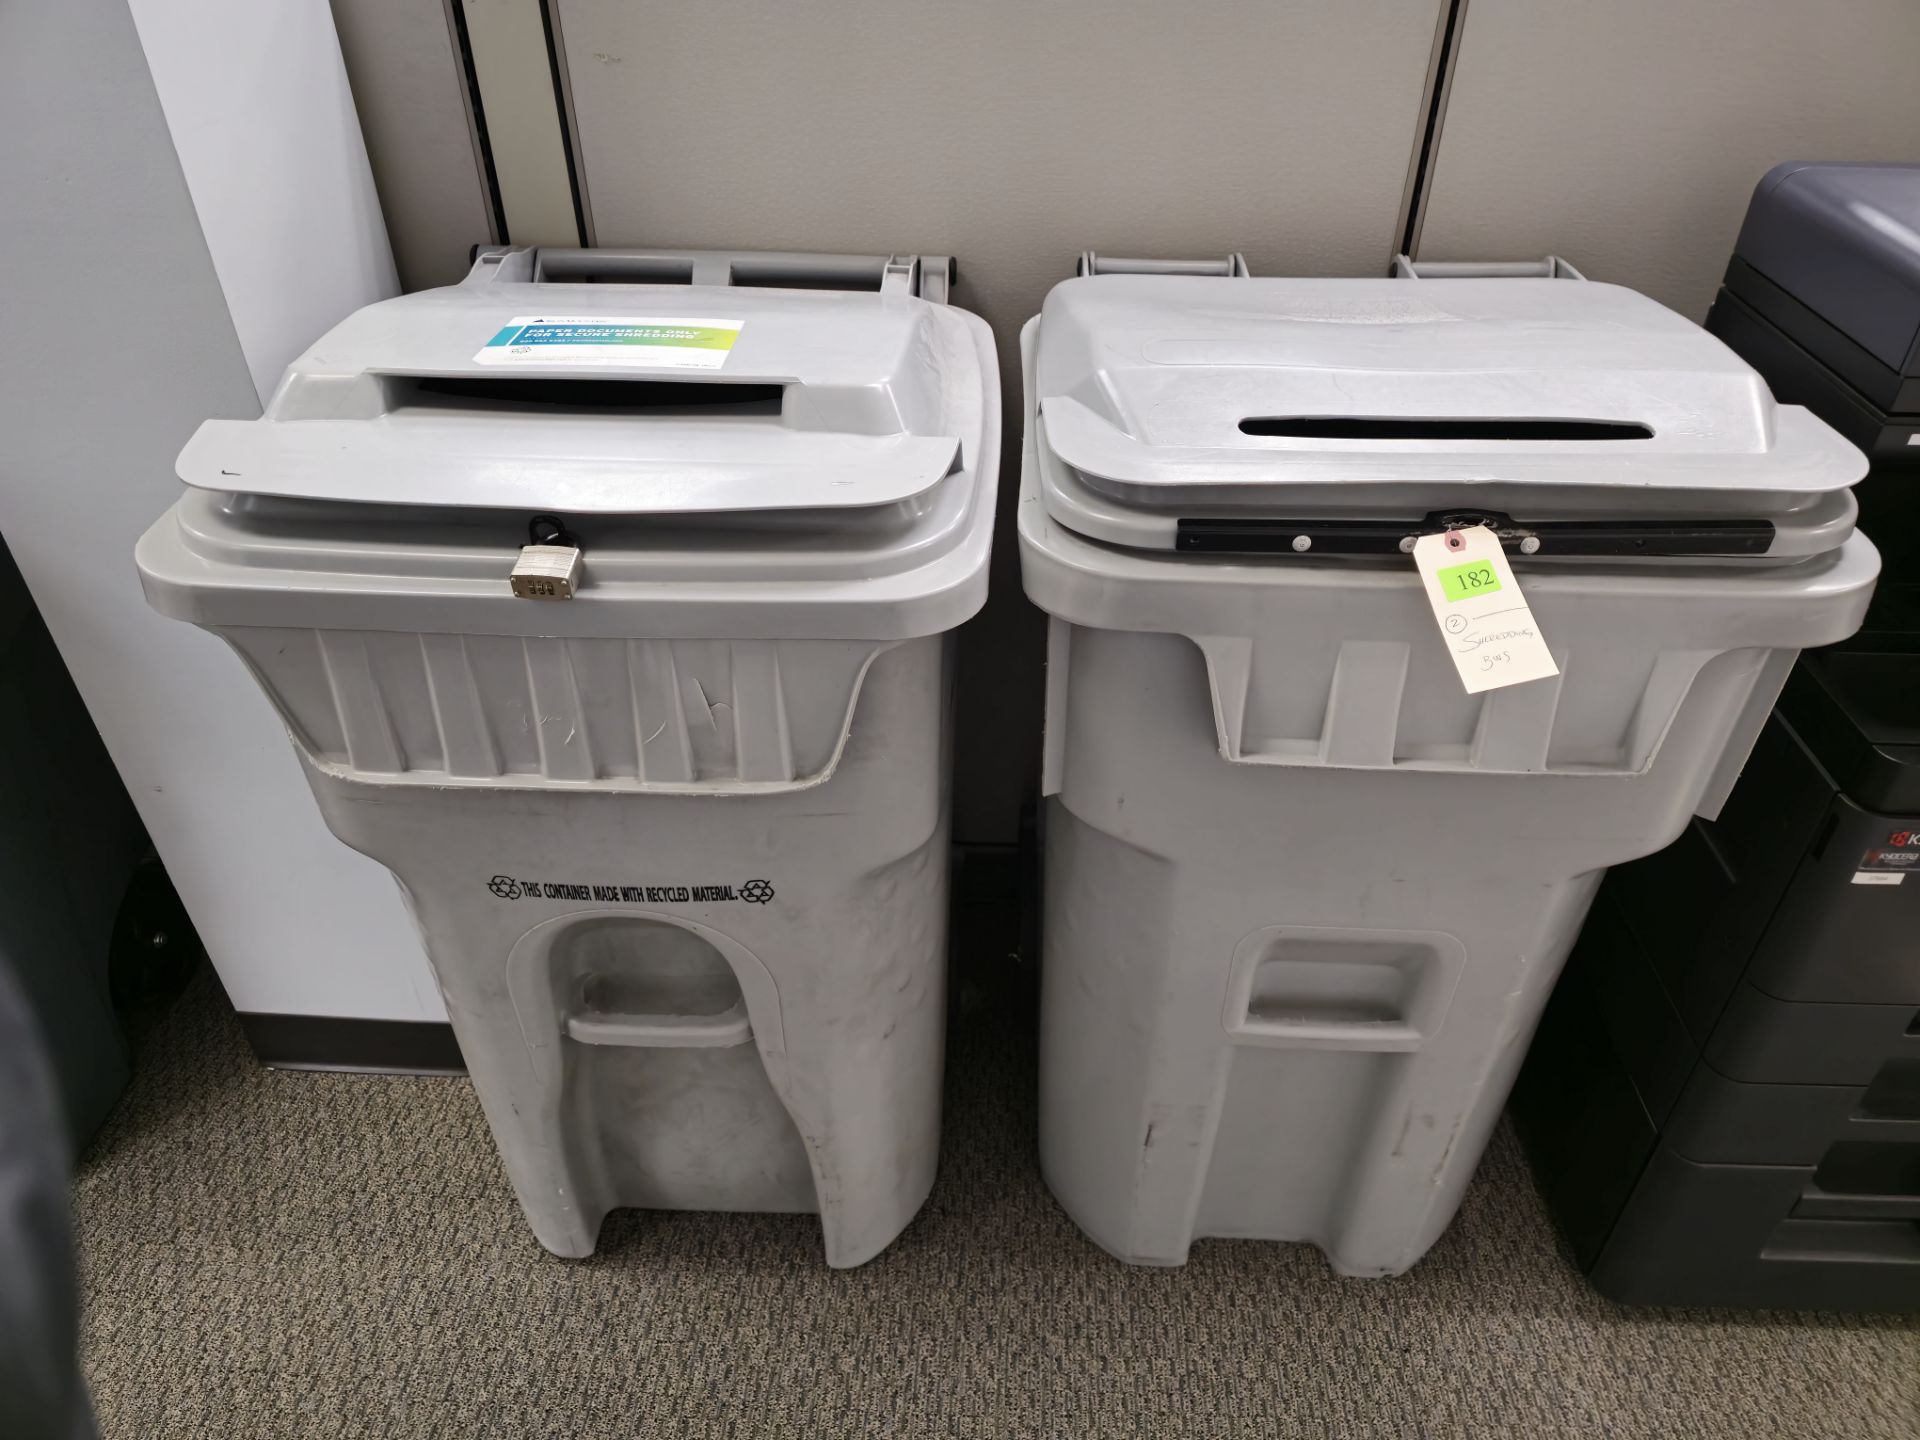 REMOVED FROM SALE - SHREDDING BINS